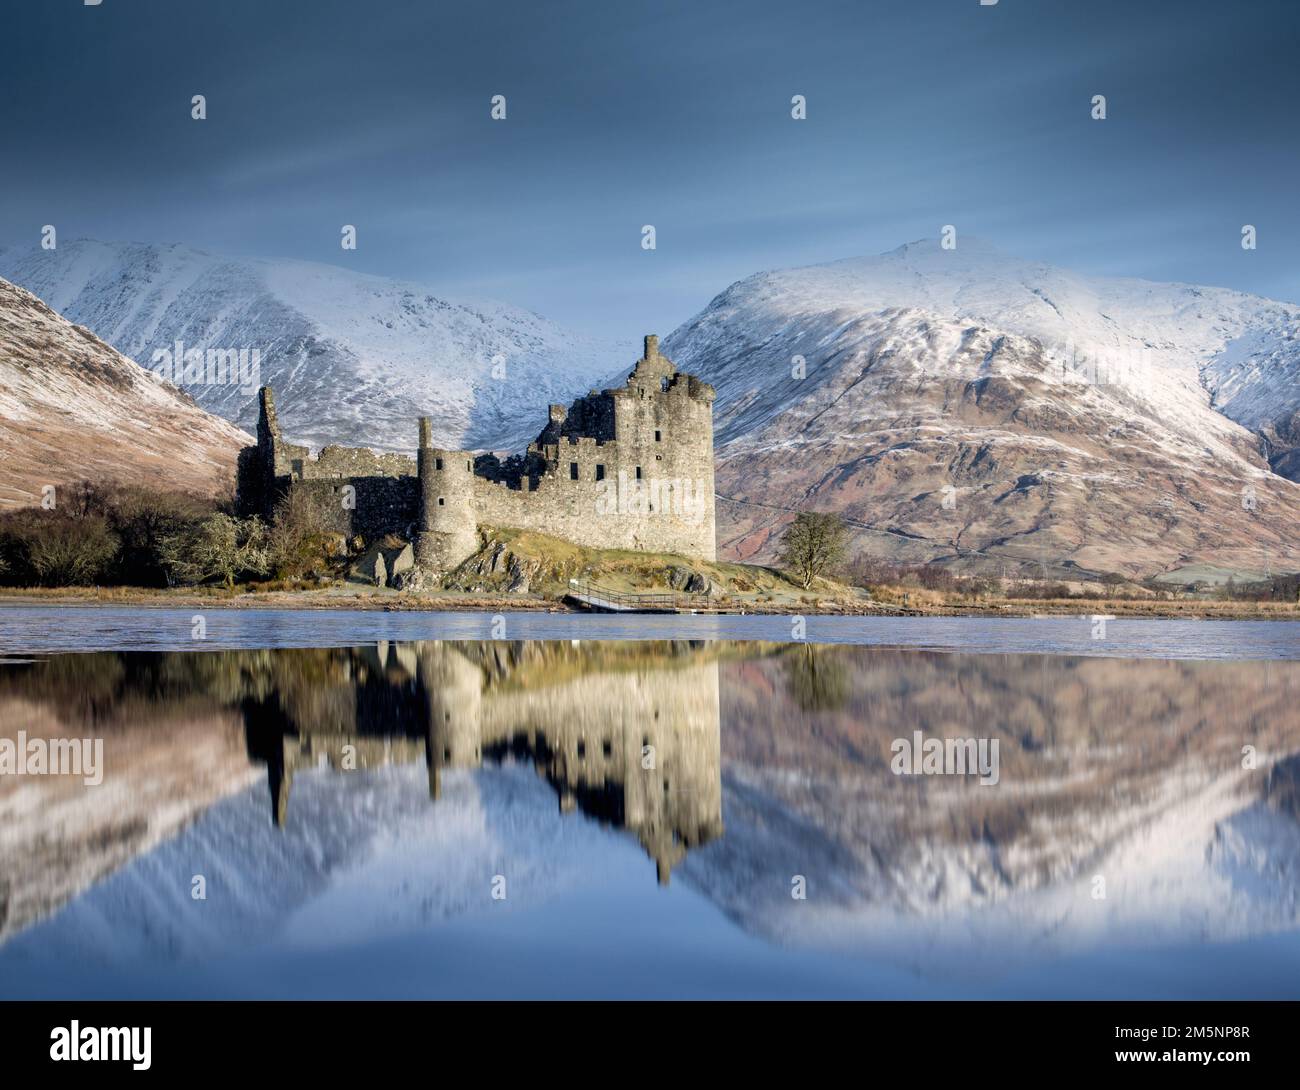 Kilchurn Castle, Loch Awe near Oban in the Scottish Highlands. Historic castle reflected in the loch with mountain backdrop Stock Photo